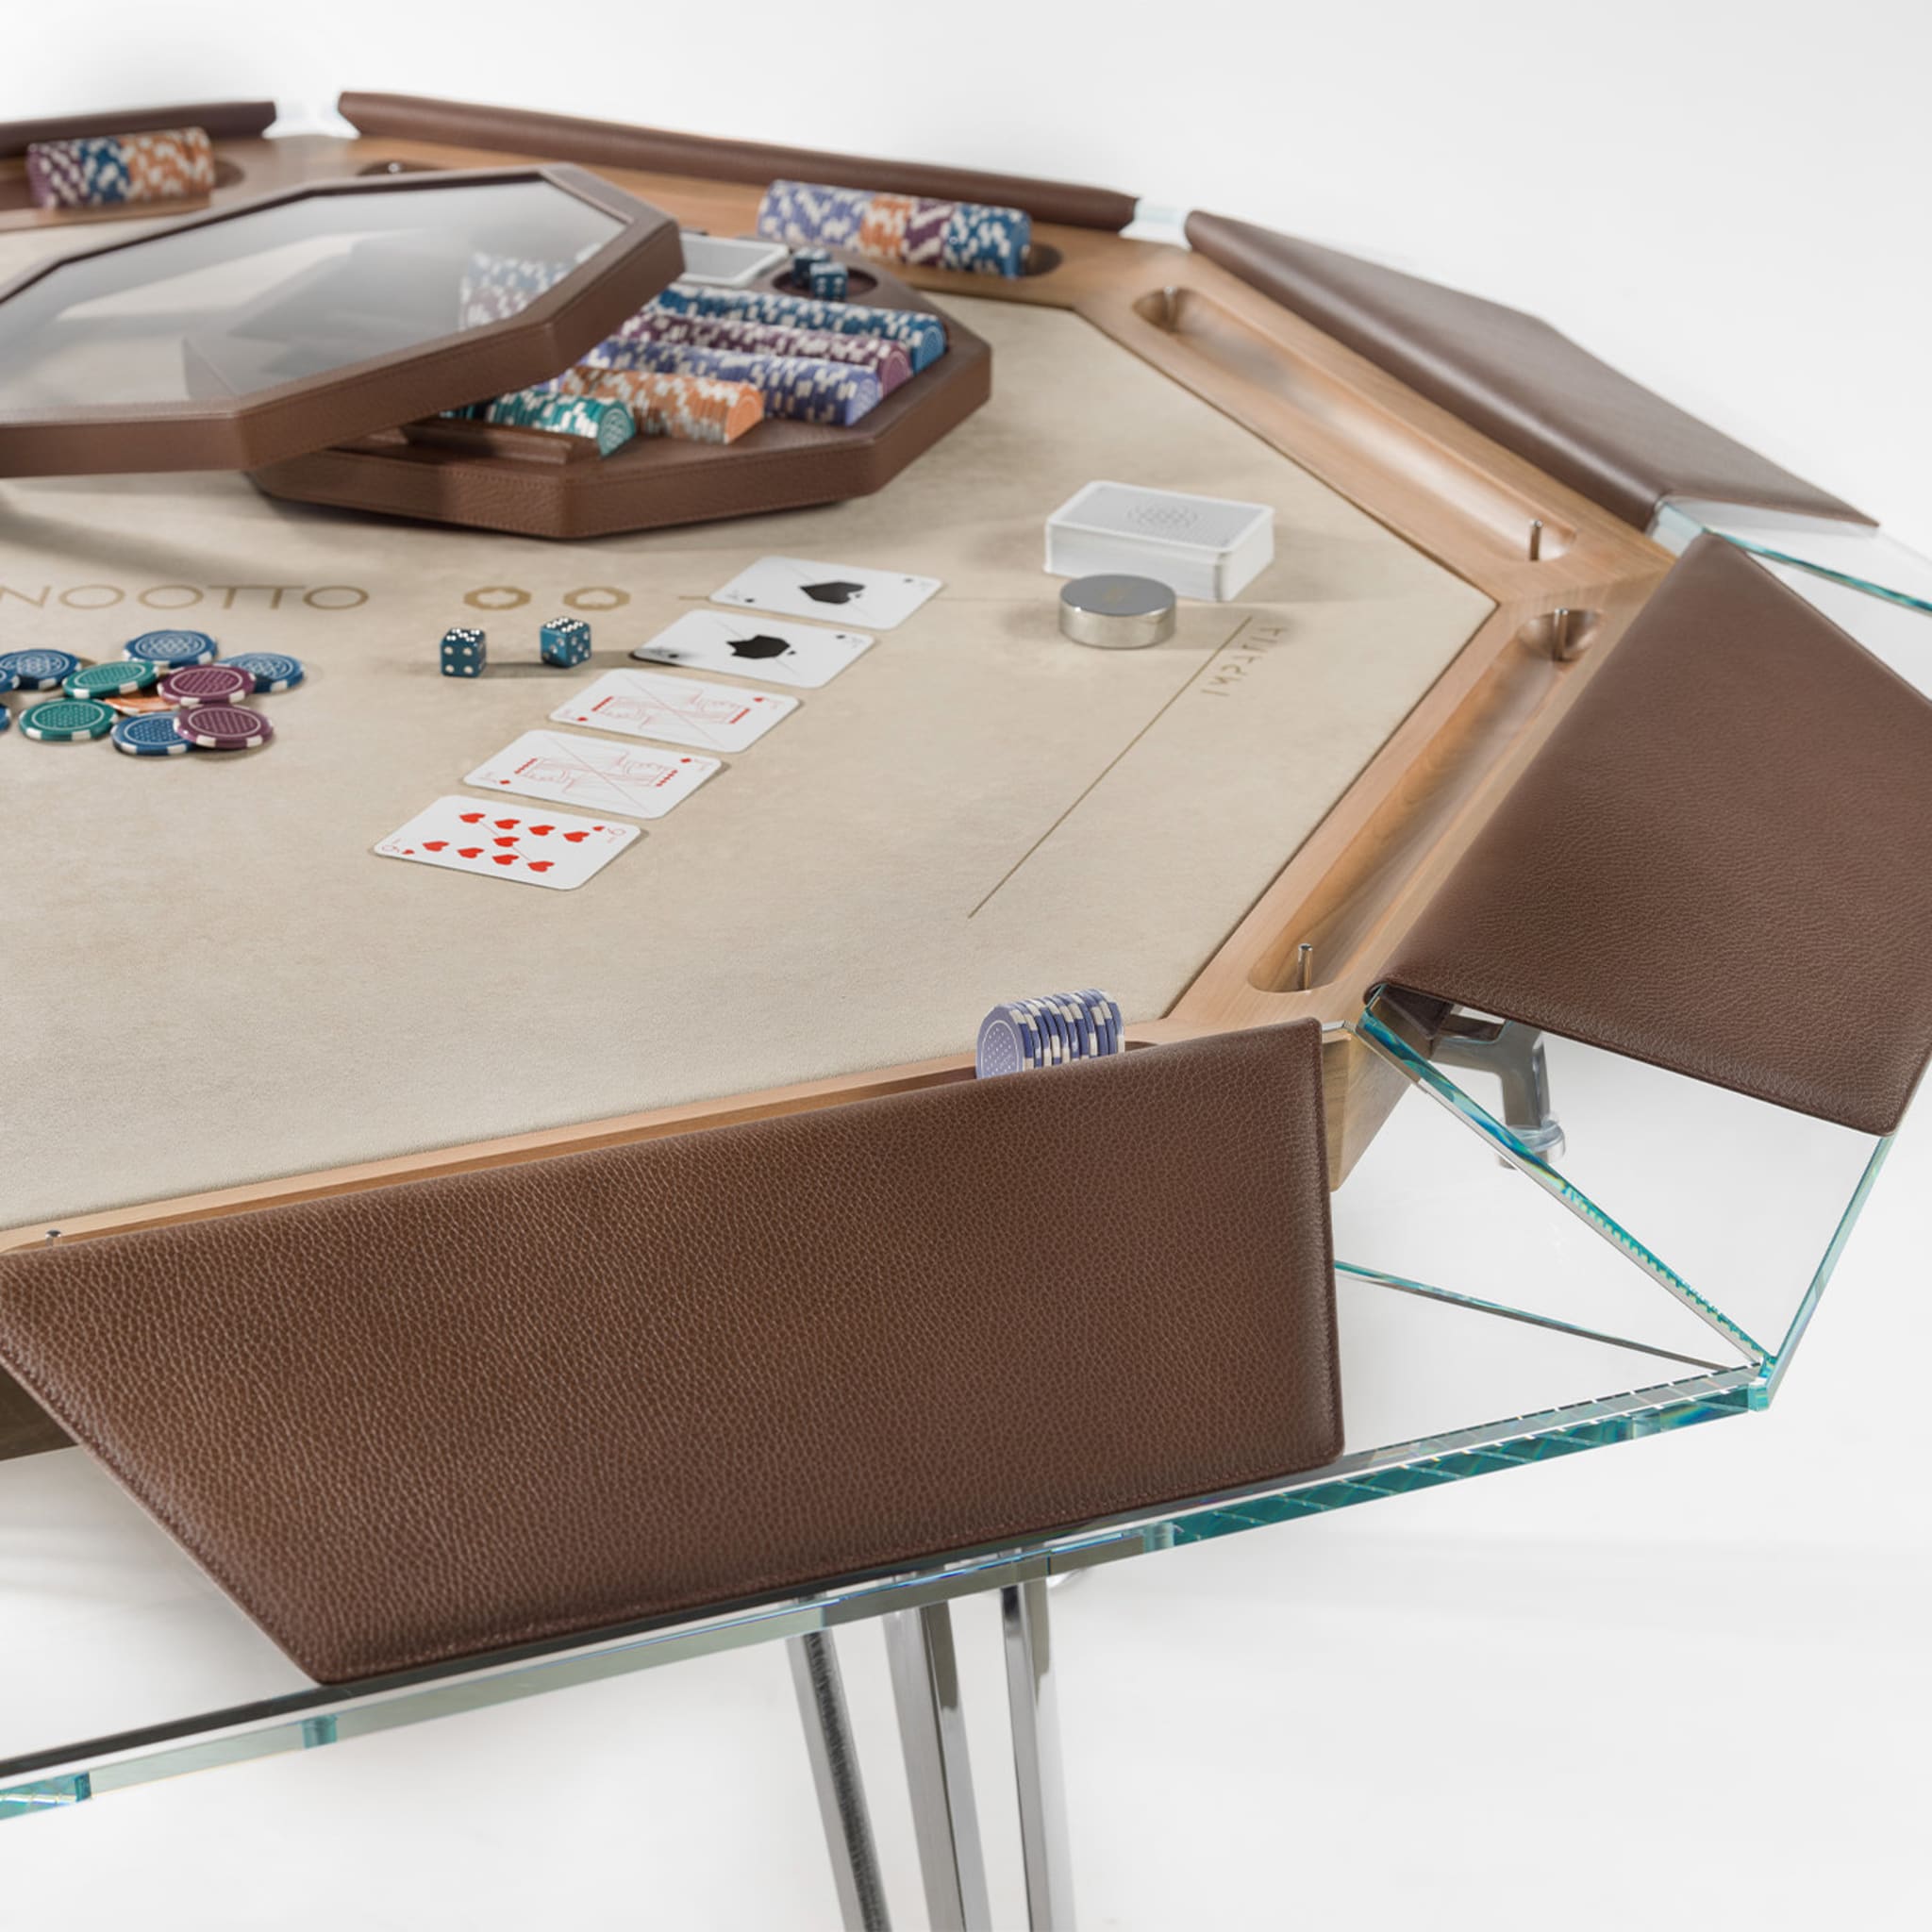 Unootto 8 Player Wood Edition Poker Table - Alternative view 1